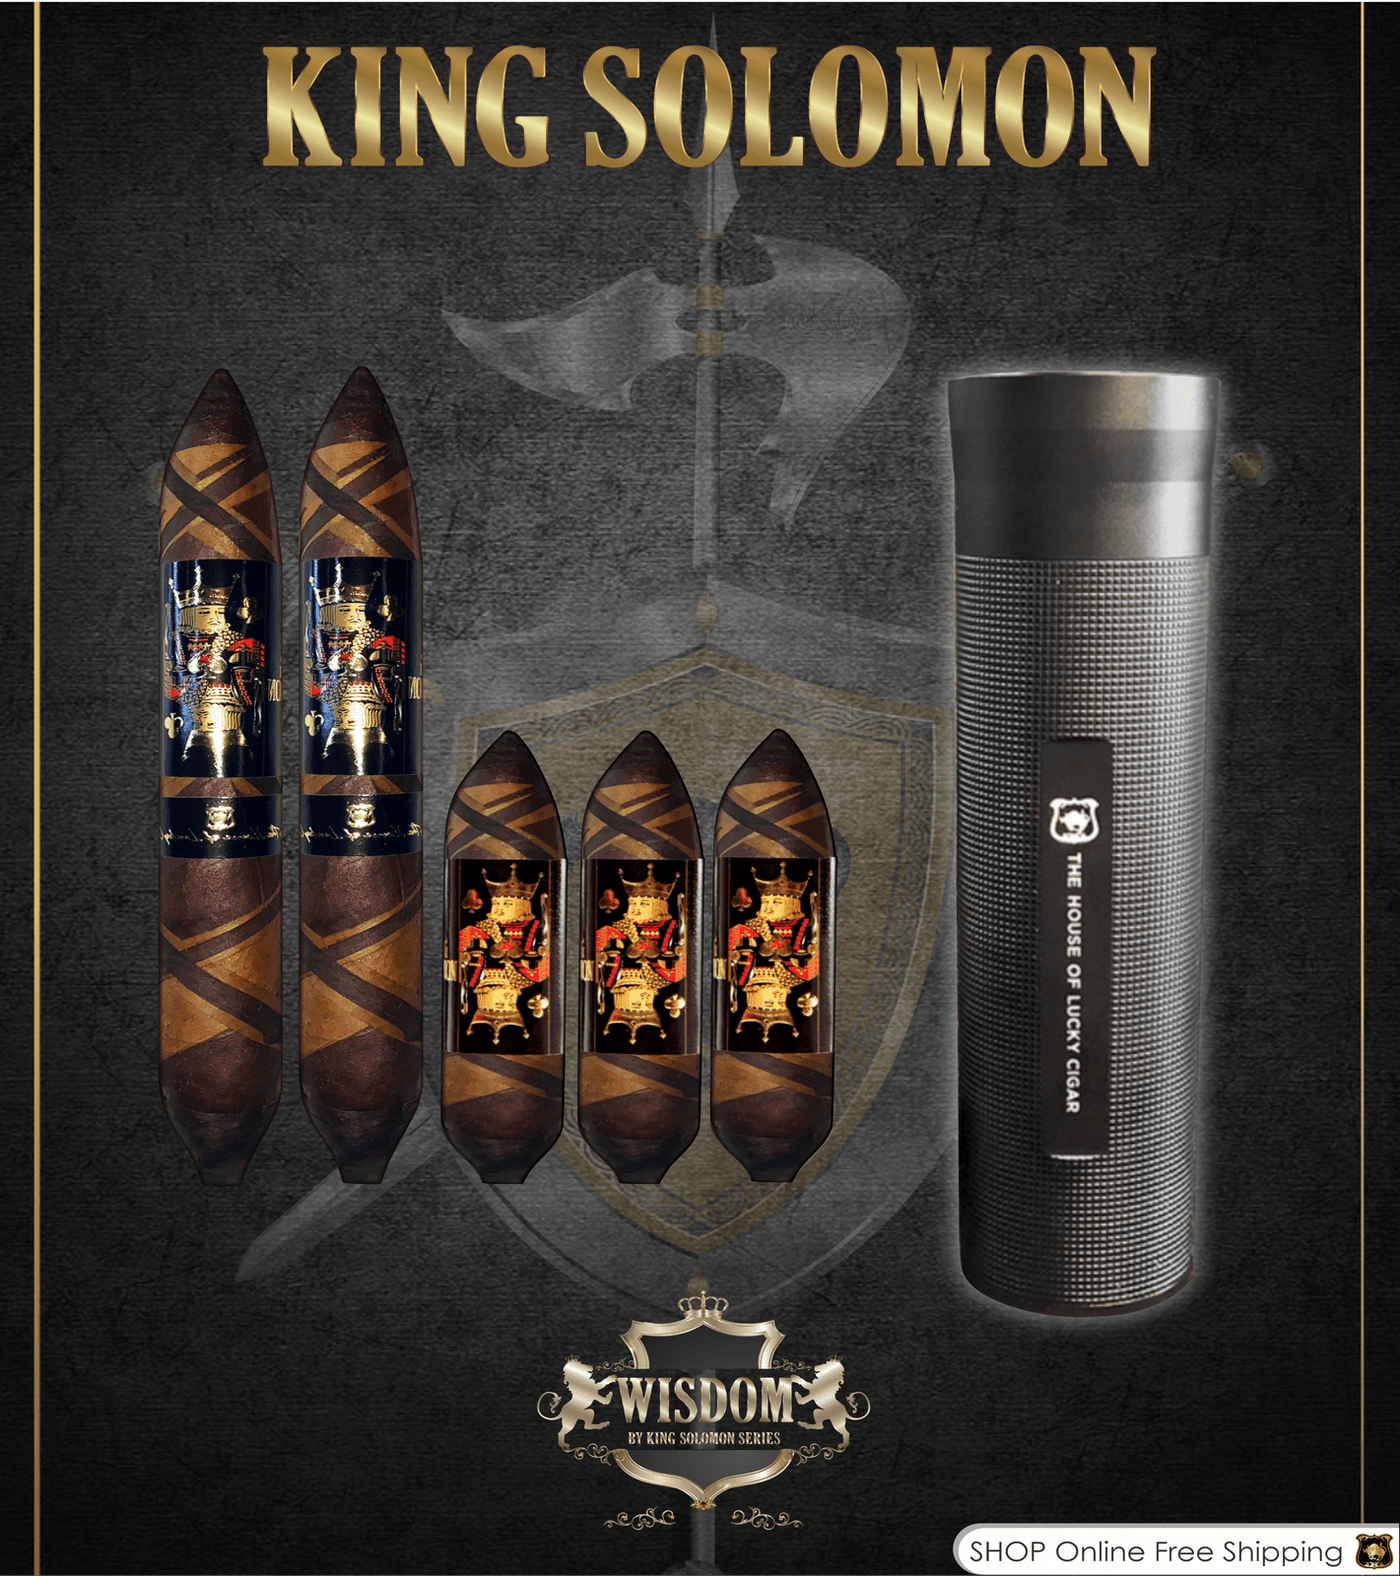 Wisdom 4x60 Cigar From The King Solomon Series: Set of 3 and 2 King Solomon 7x58 Cigar with Travel Humidor